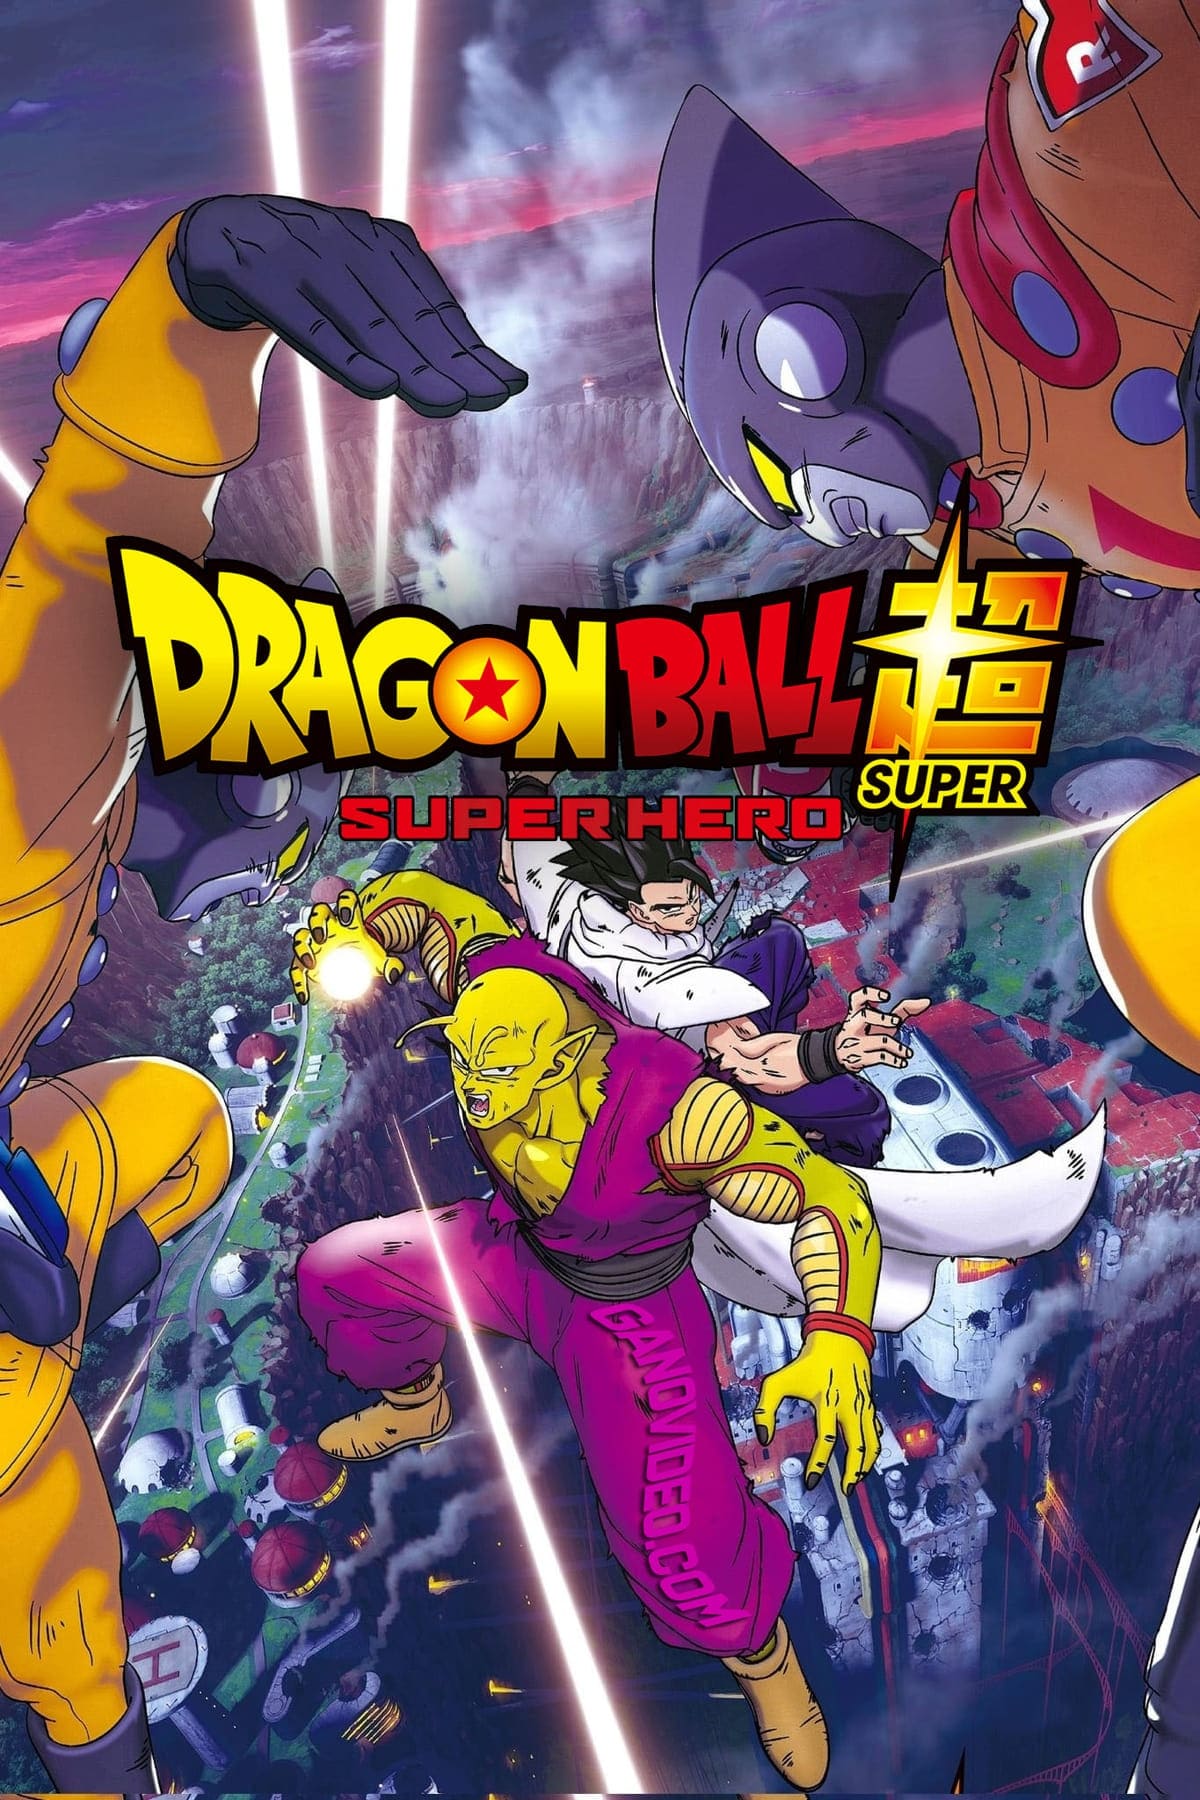 ashish fageria recommends dragon ball movie torrent pic